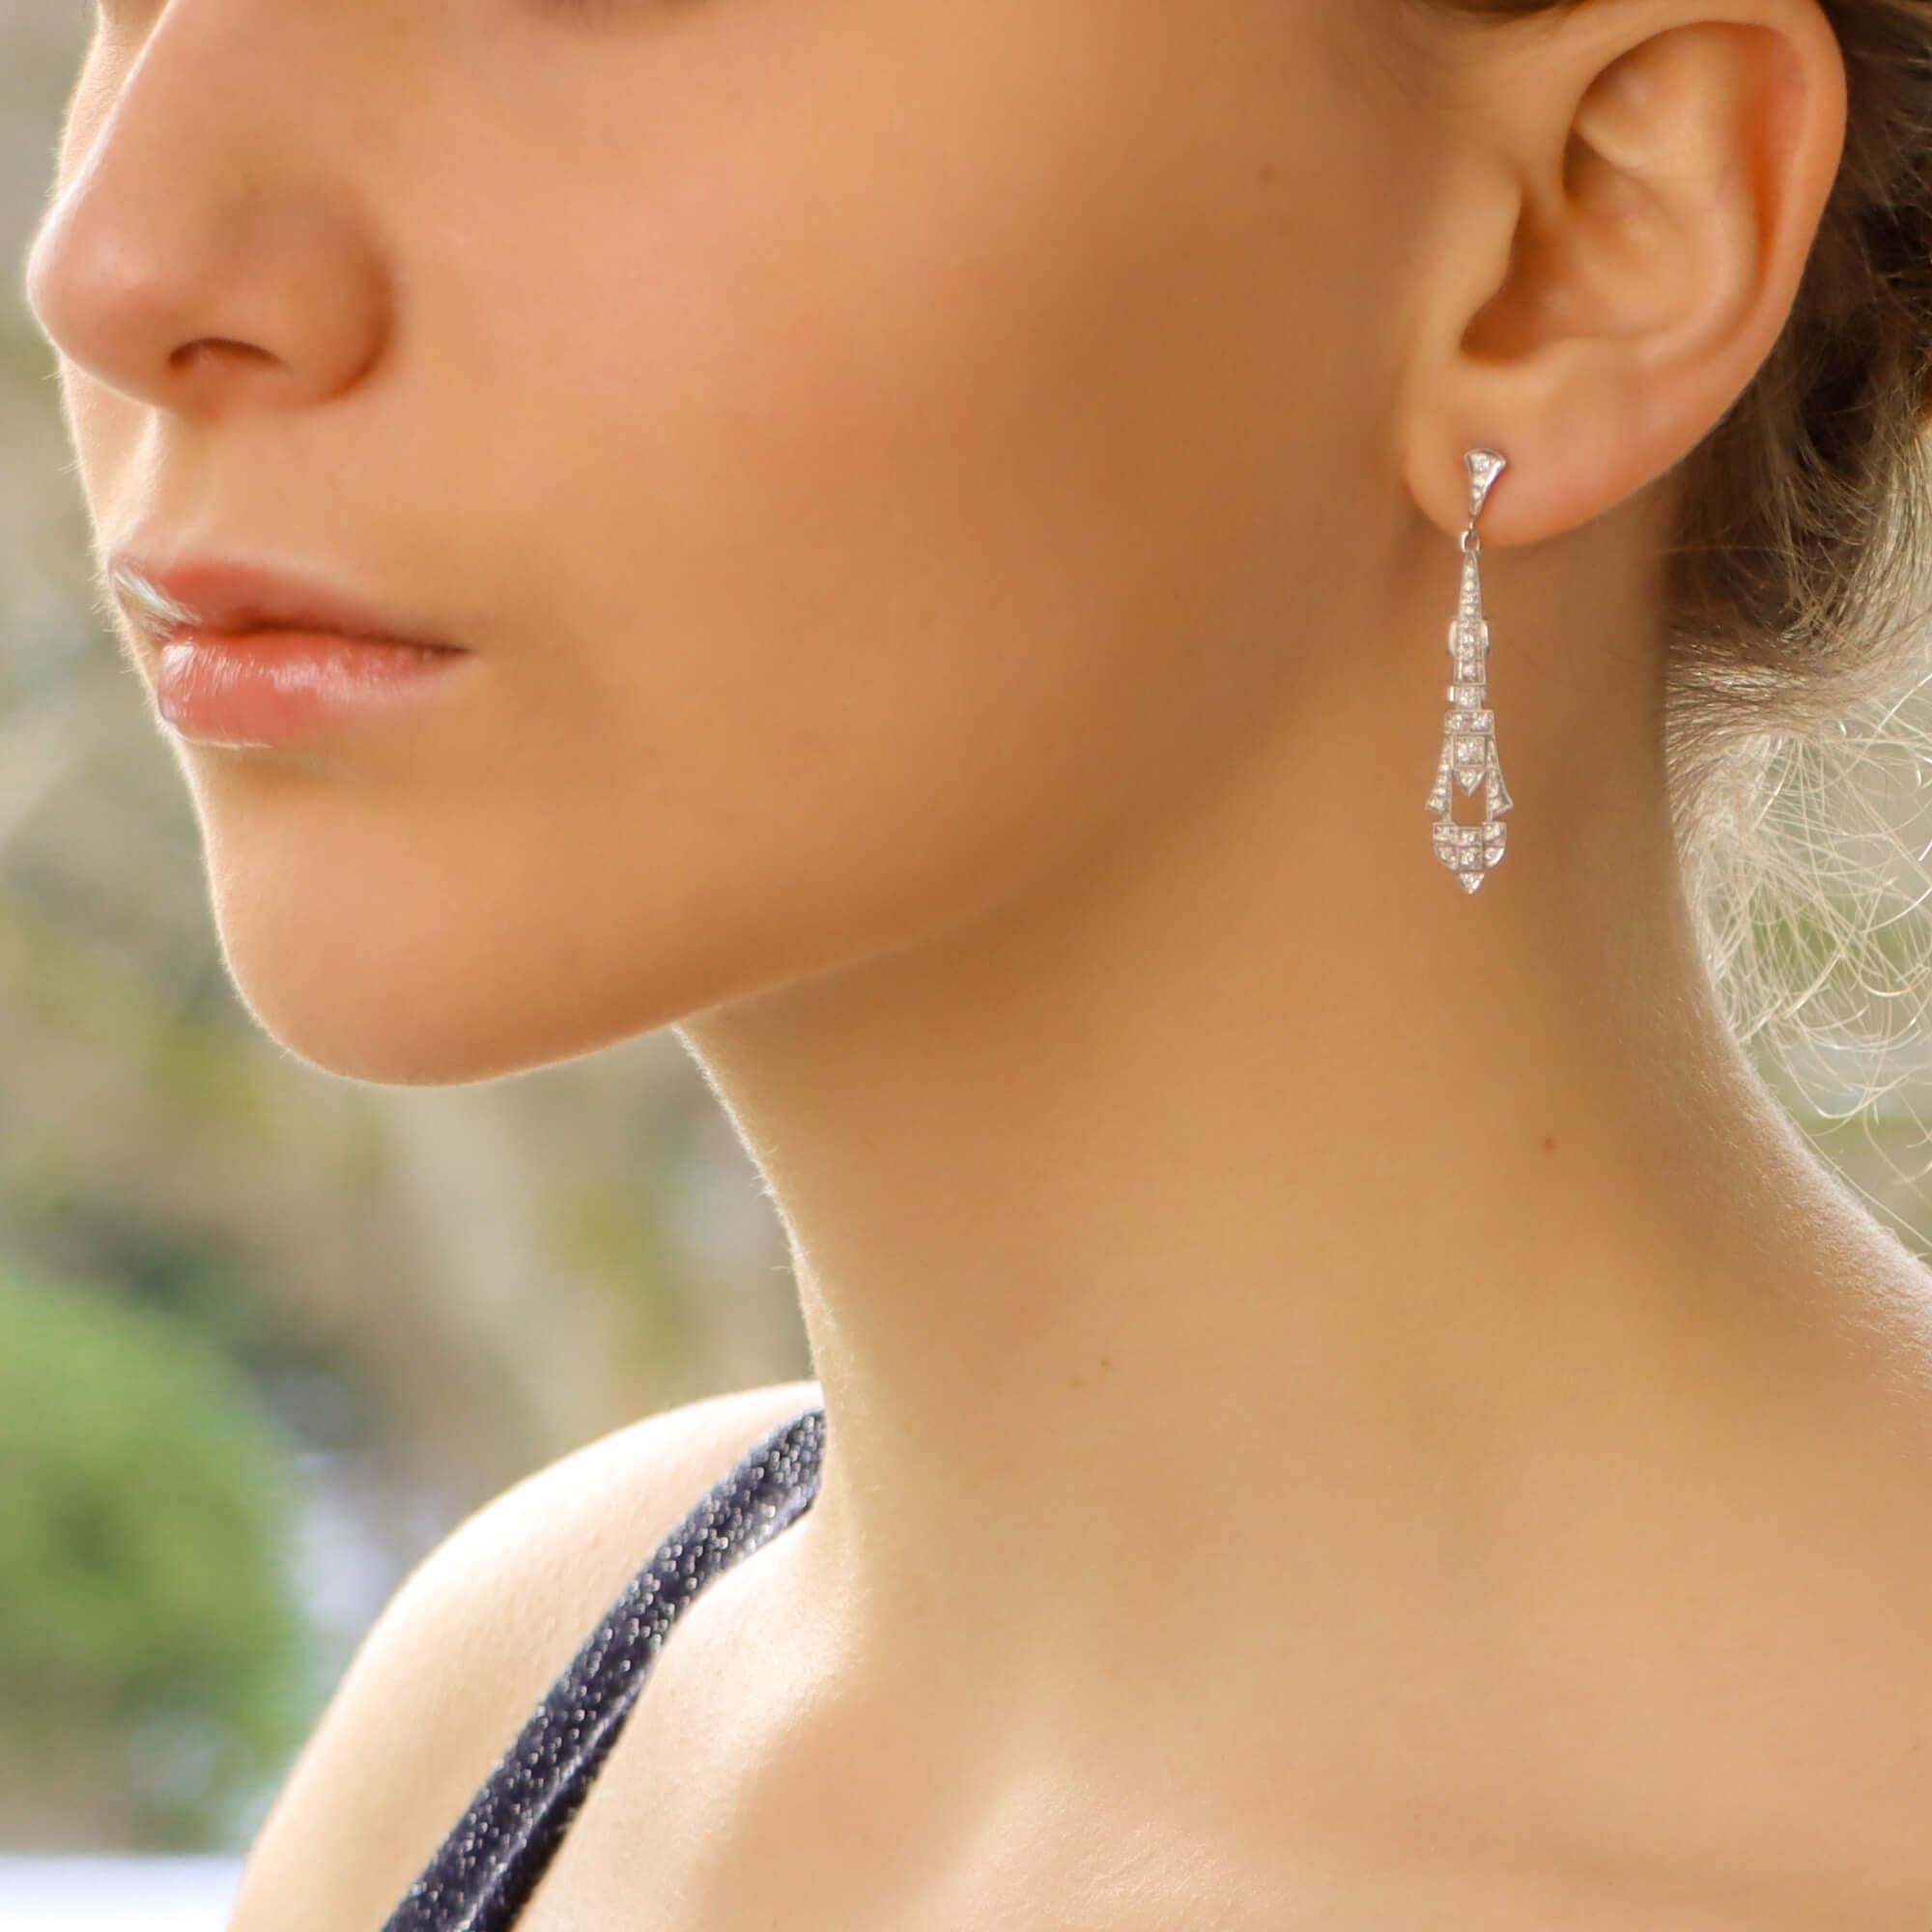 A beautiful pair of Art Deco inspired diamond drop earrings set in 18k white gold.

Each earring is set with exactly 31 round brilliant cut diamonds; all of which are pavé set within a beautiful Art Deco style drop. The beauty of these earrings lies